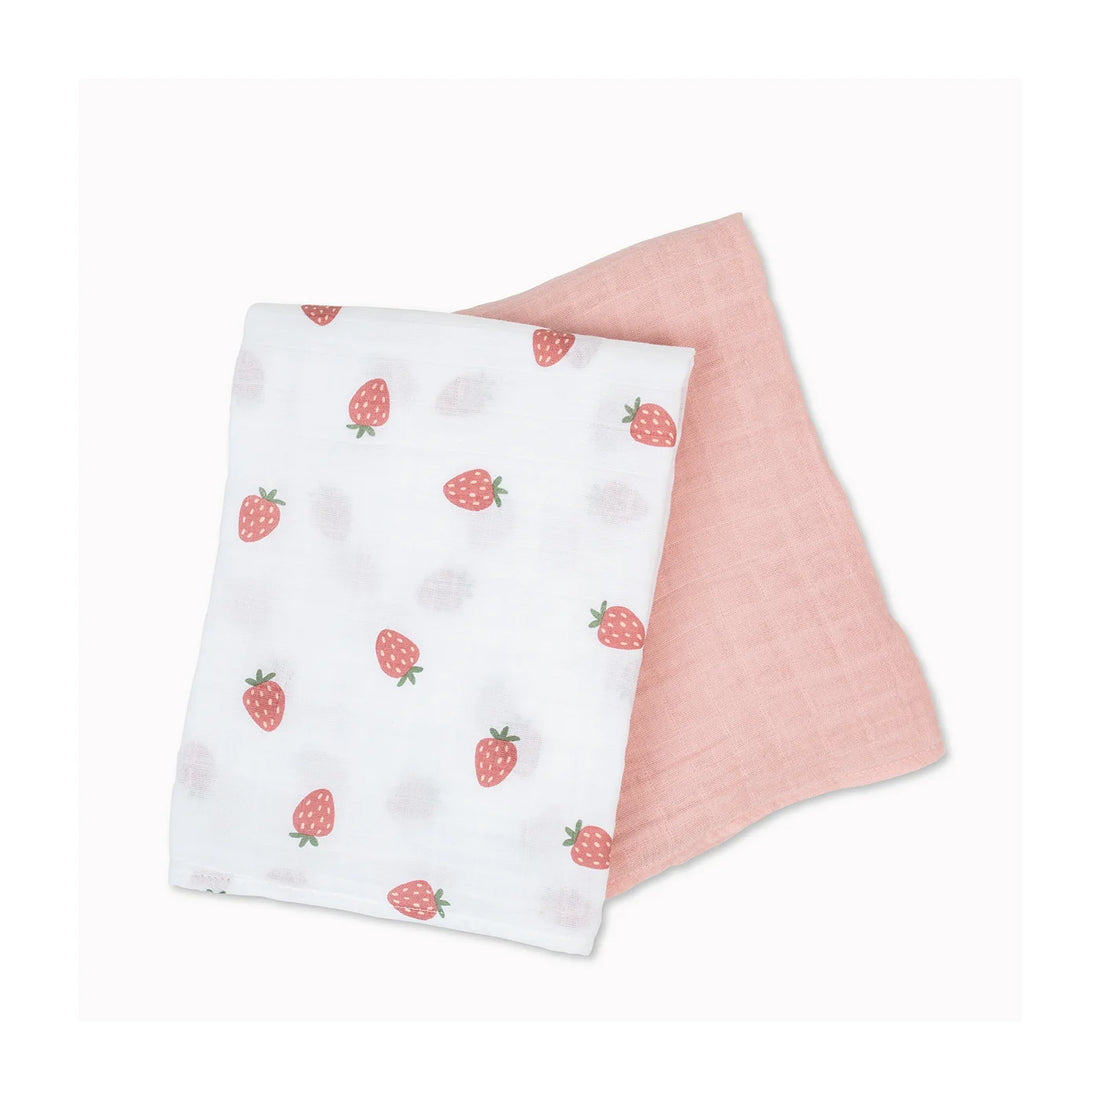 Cotton Muslin Swaddle Blankets - 2 pack